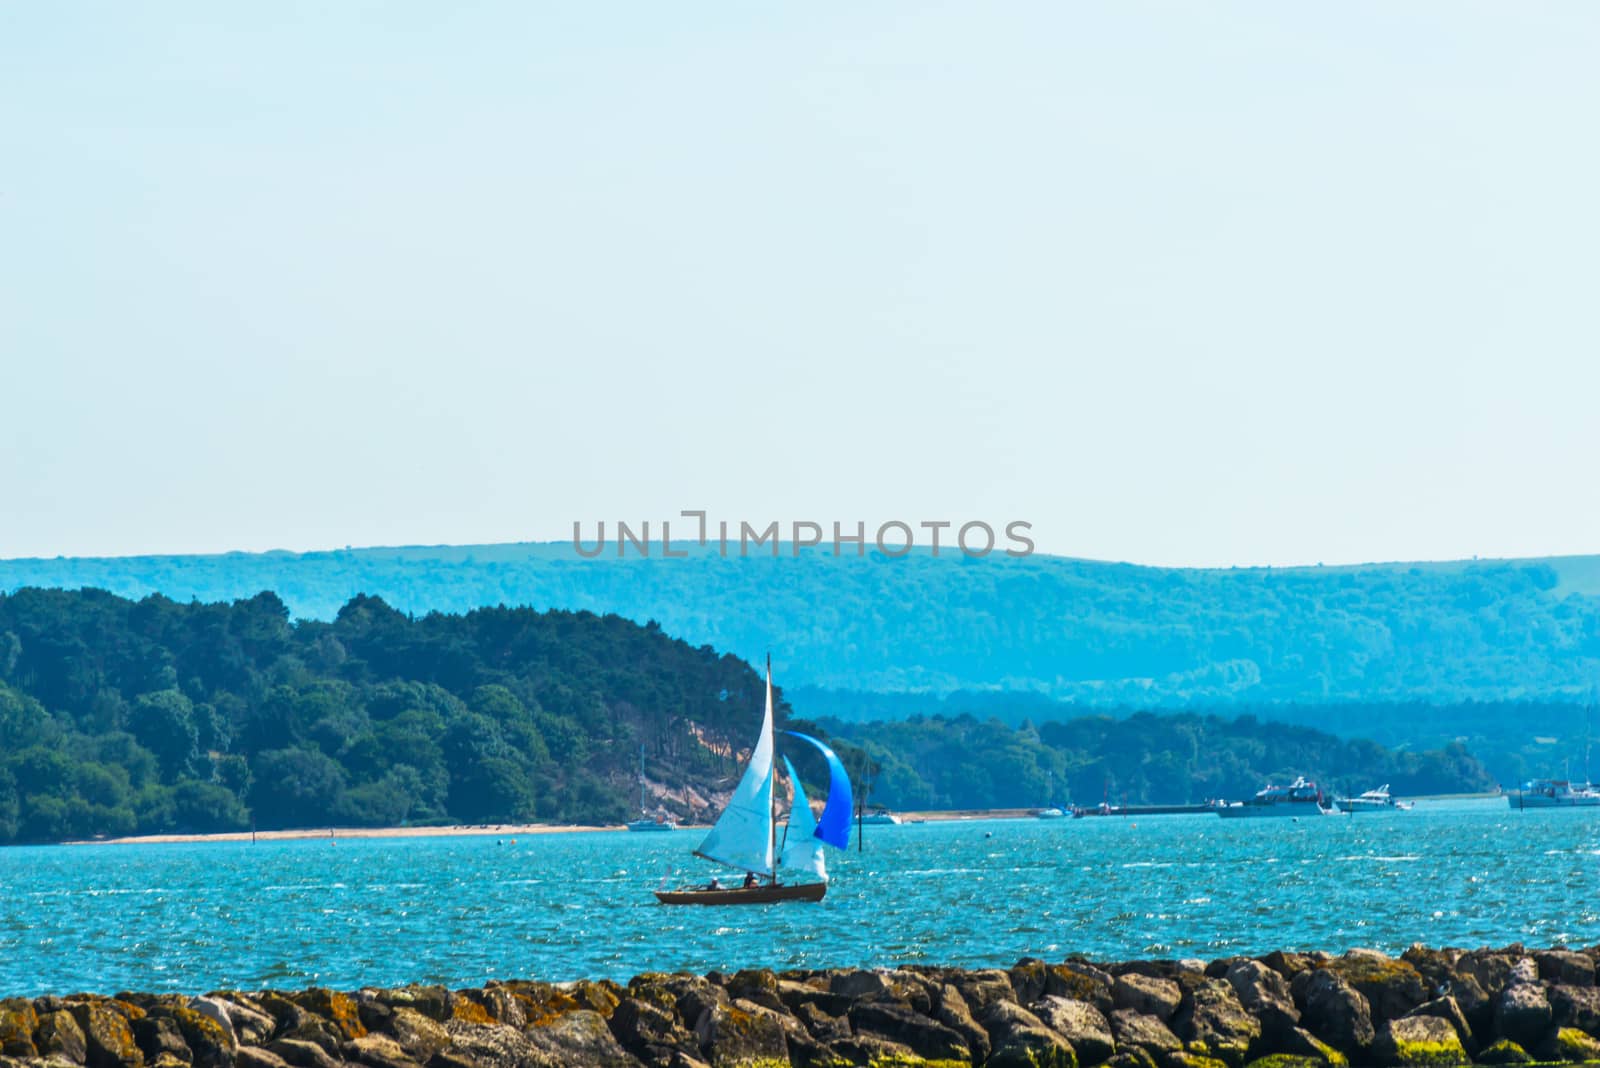 Beautiful yachts in the bay, sailing on the ocean, clear sky, bl by Q77photo